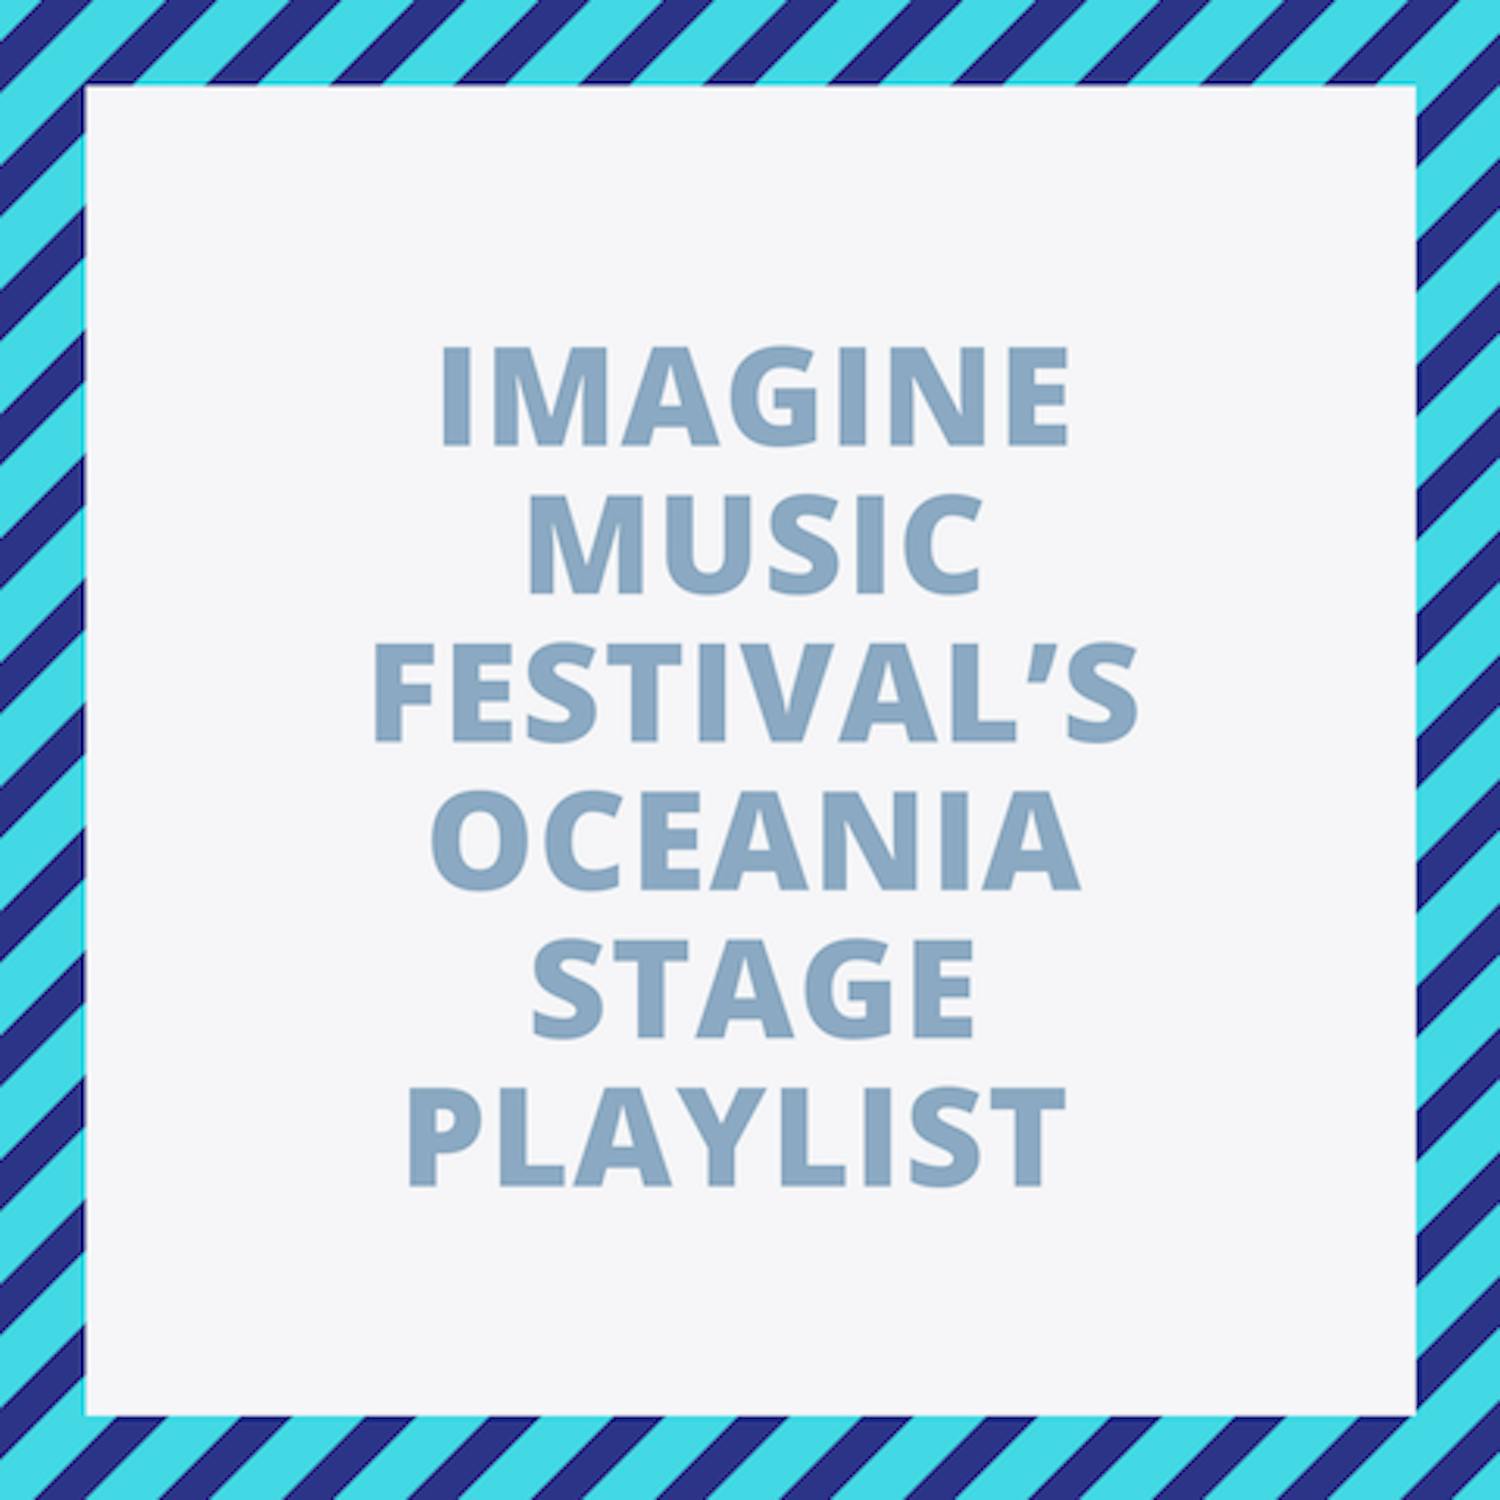 IMAGINE MUSIC FESTIVAL’S OCEANIA STAGE PLAYLIST.png